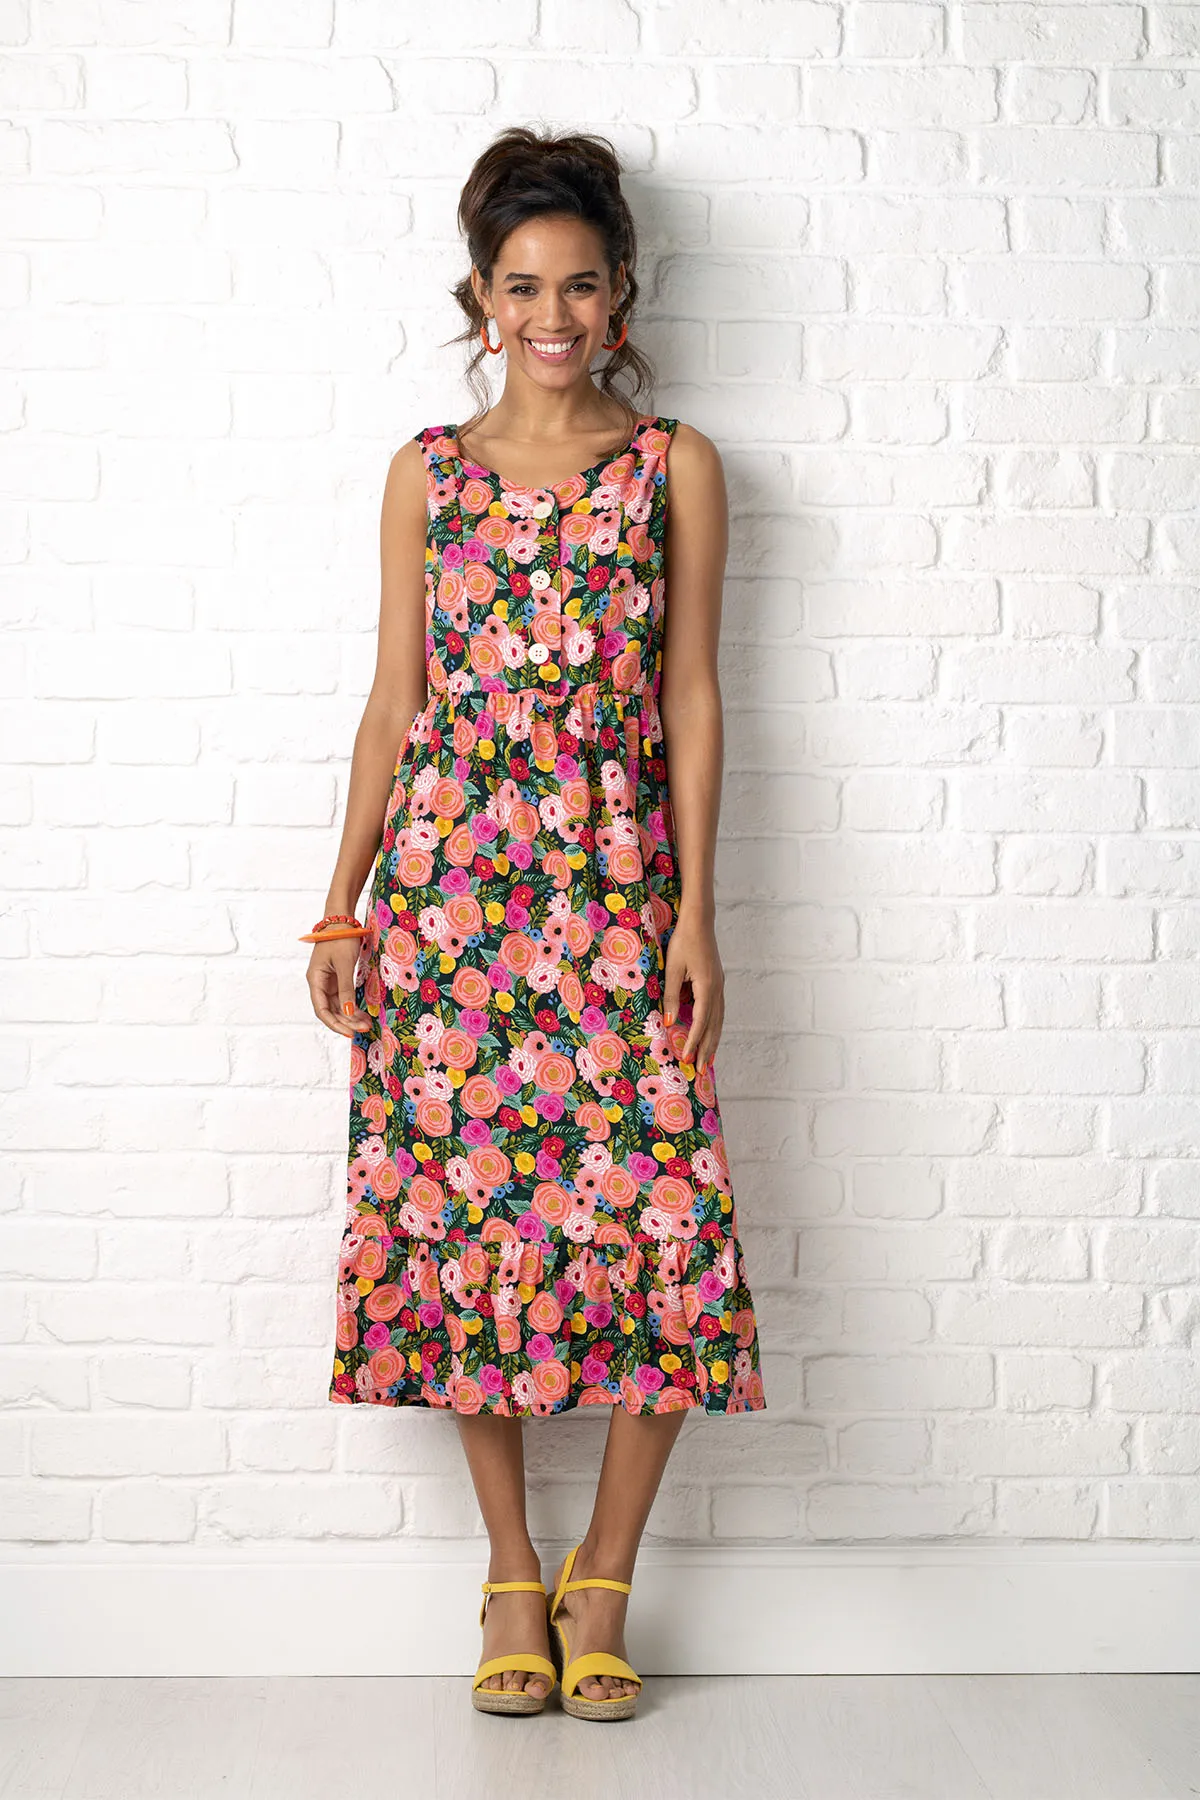 Rosa dress from Simply Sewing magazine